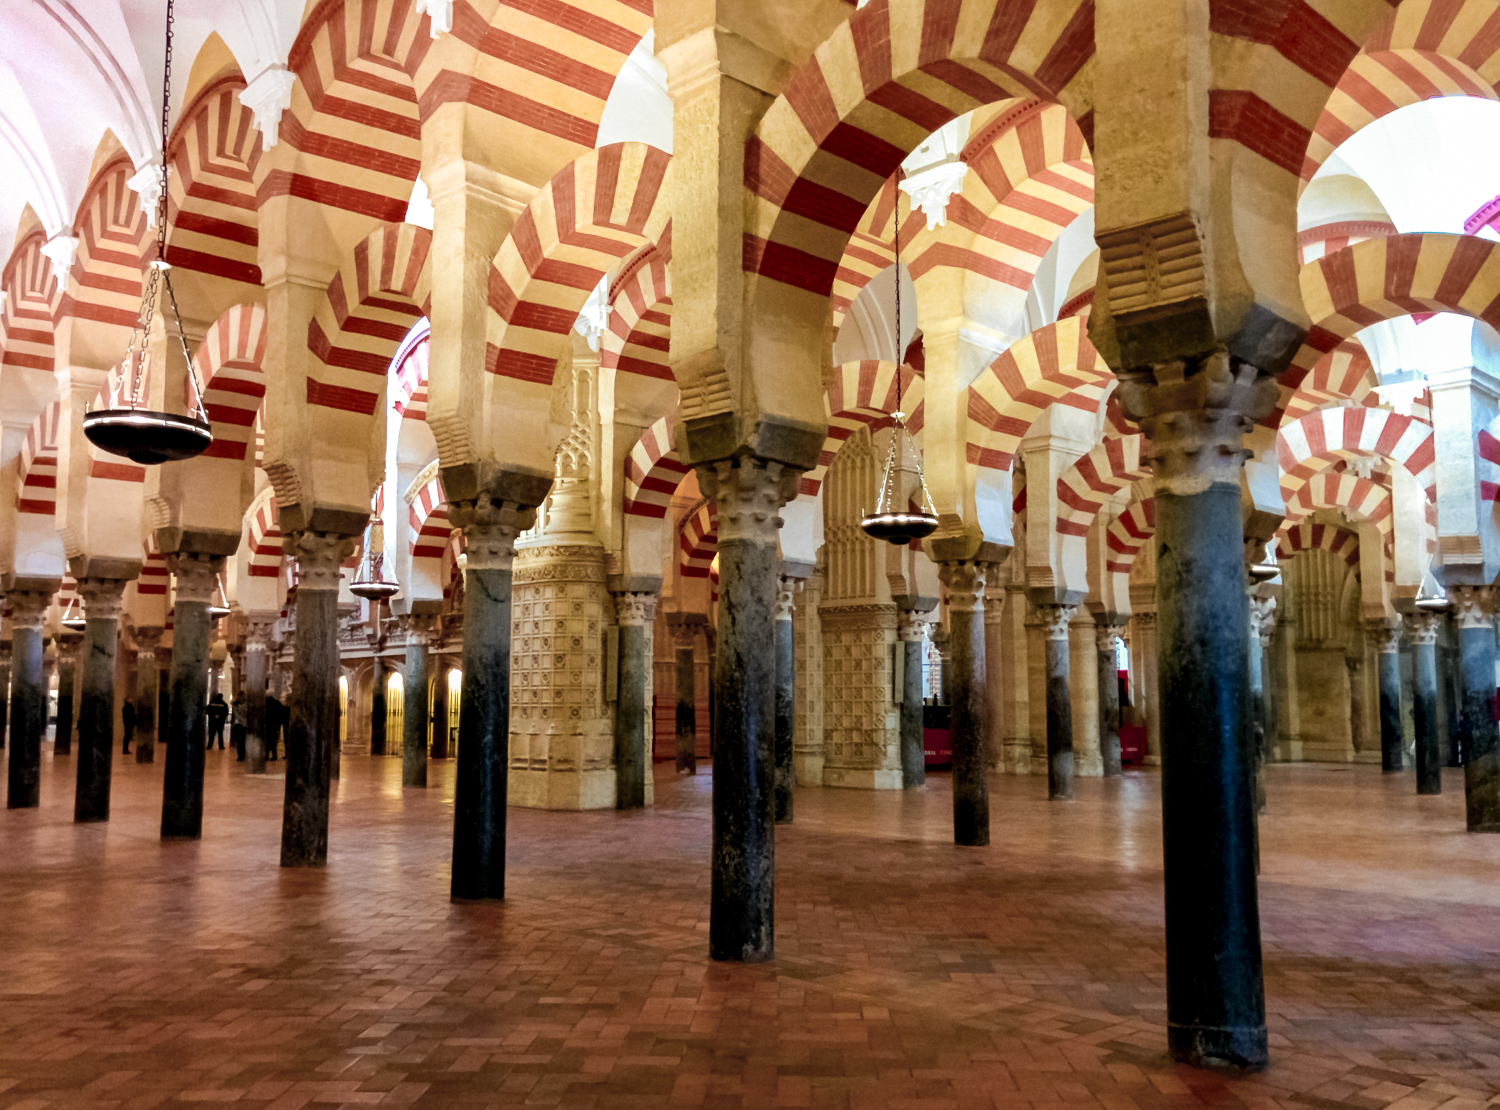 andalusia travel and